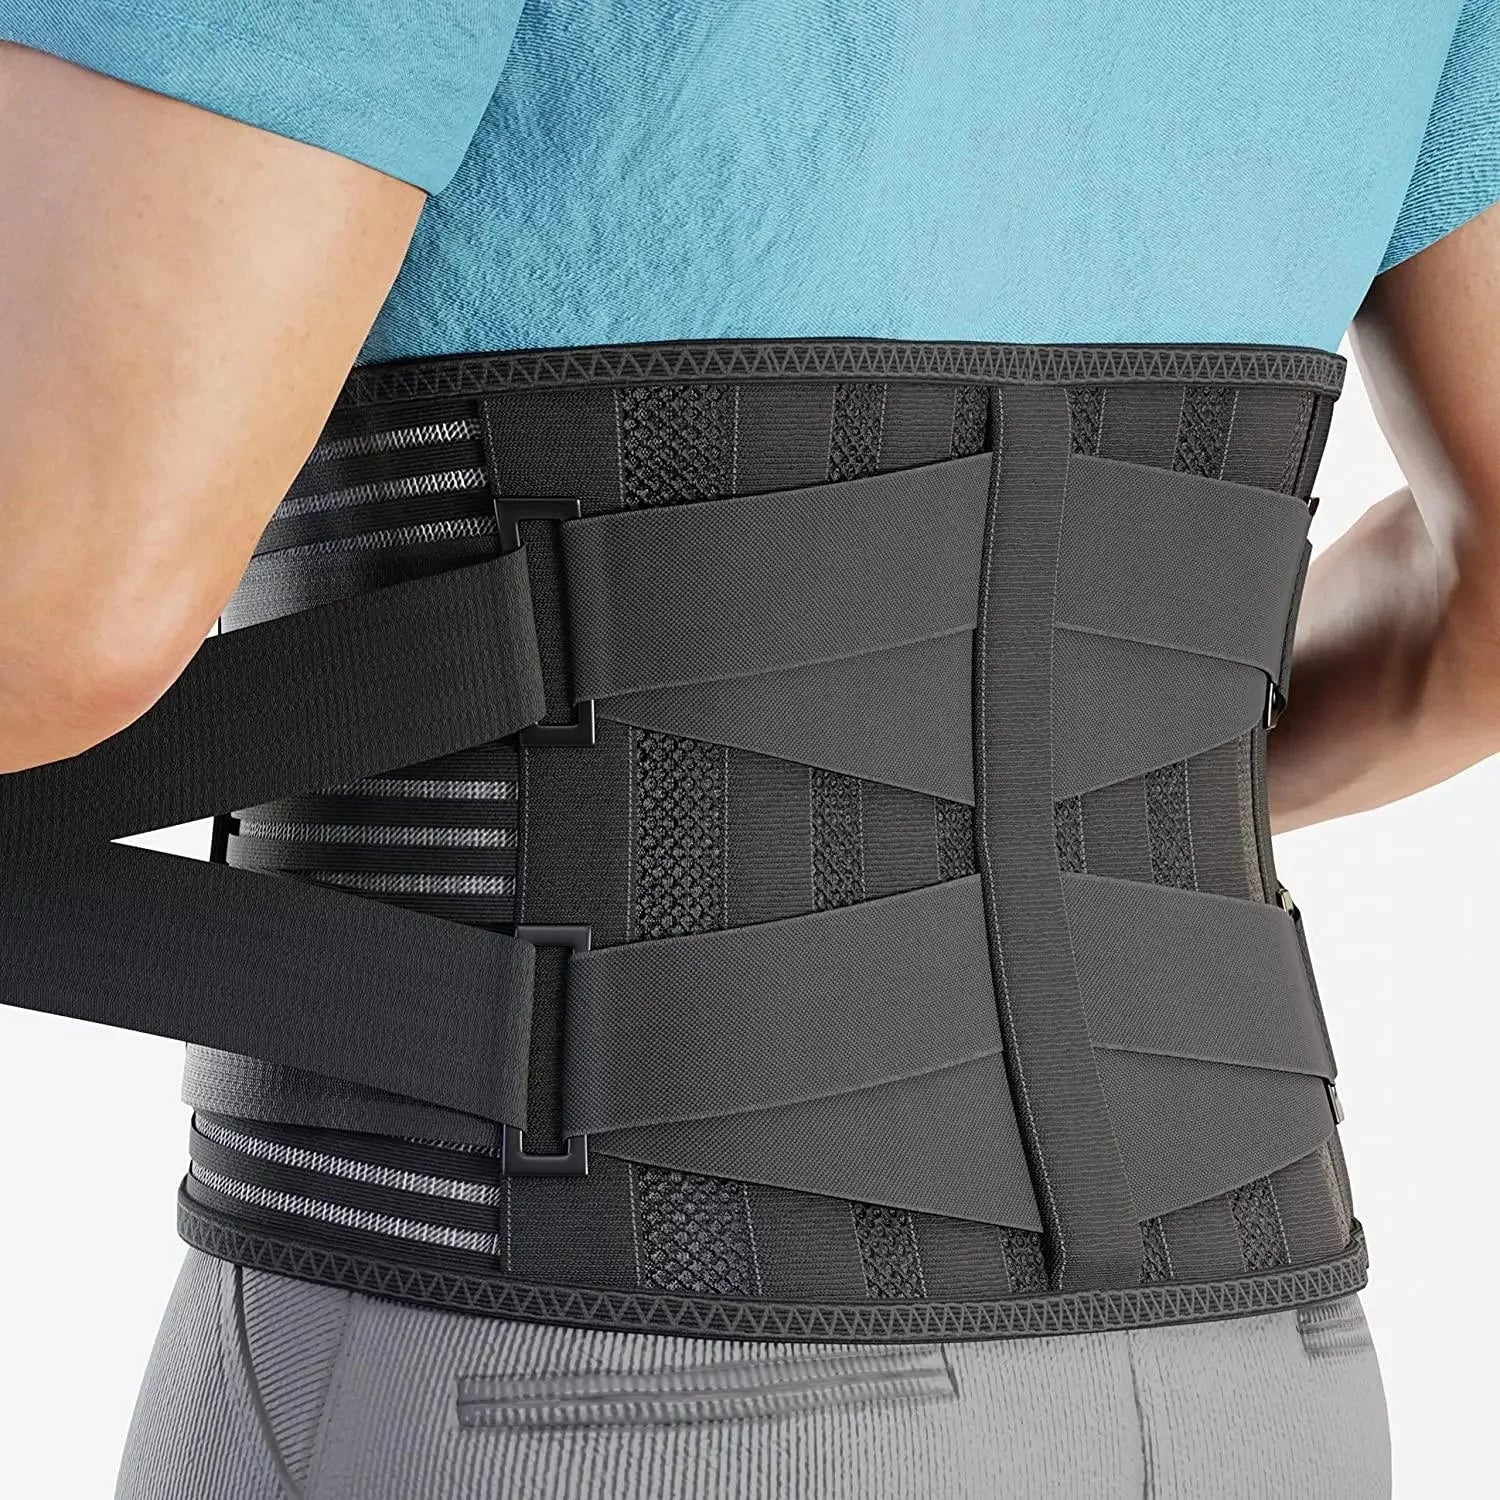 Pin on Back Pain Treatment  Braces, Belts & Supports for Lower